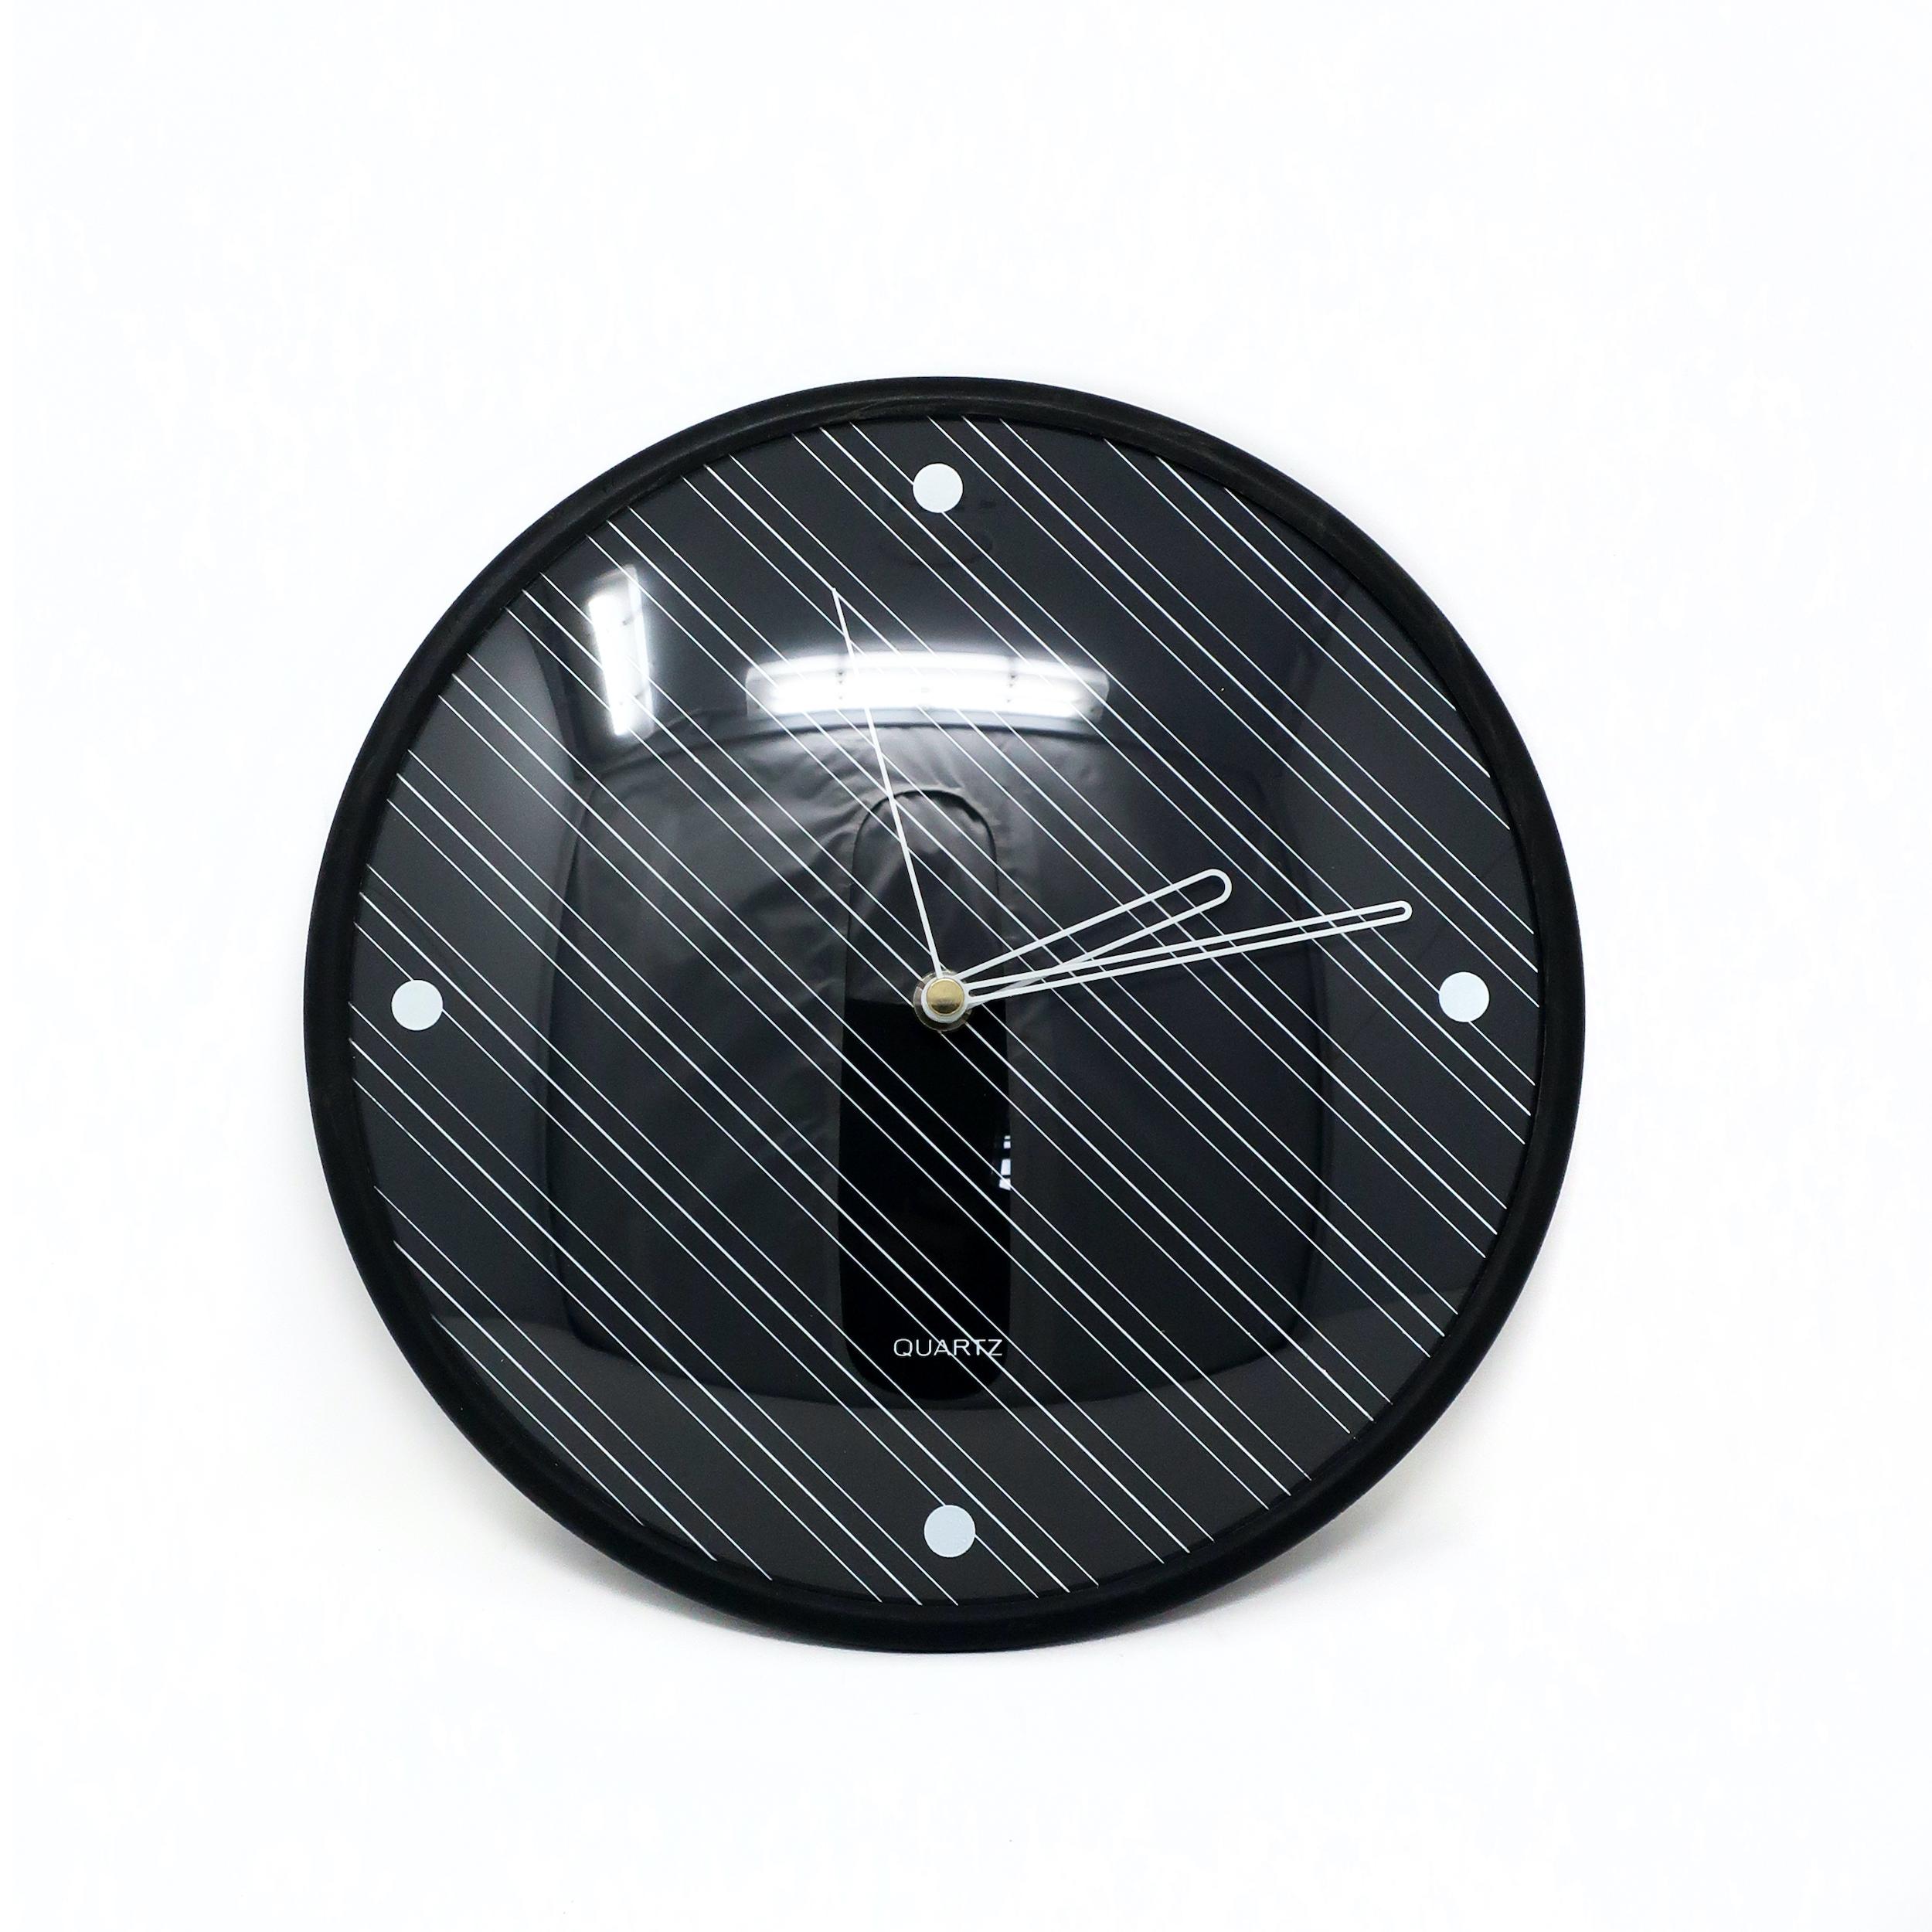 A striking 1980s black wall clock with diagonal pin stripes at a 45 degree angle and white pin stripe hands. Produced by Baker Hart & Stuart, a home goods brand for the department store chain Mervyns that was well known for its ceramic goods, but